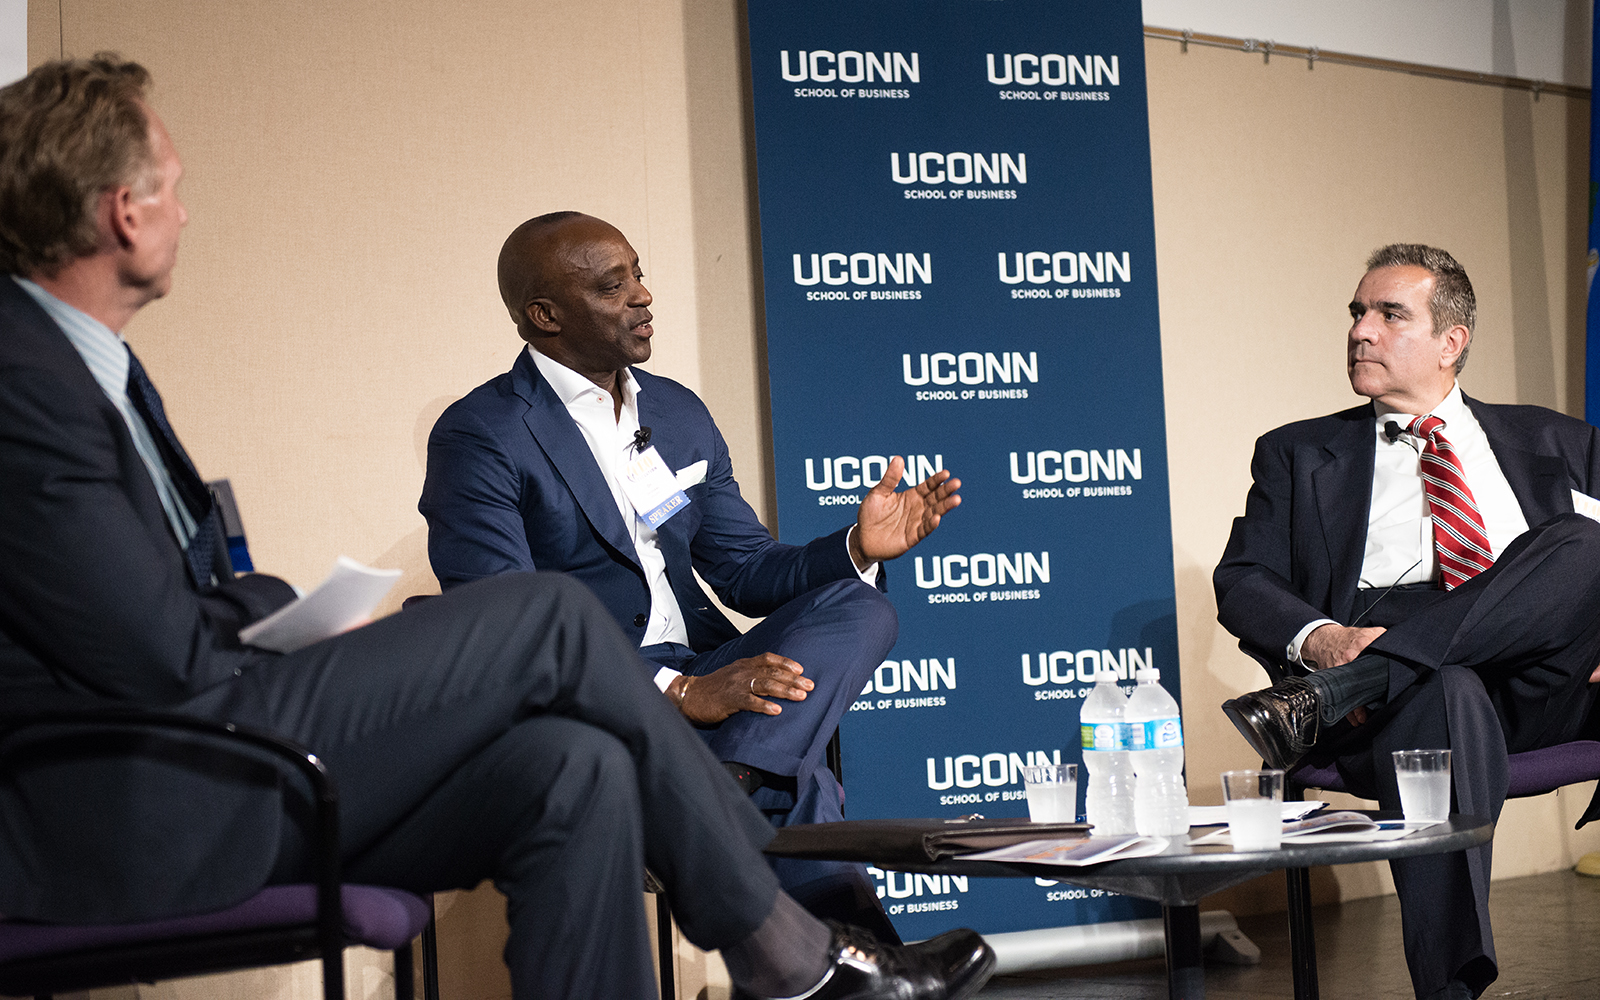 From left: Mark Fagan, office managing partner at Citrin Cooperman, Oni Chukwu, CEO and member of the board of directors at etouches, and John J. Preli, director of regulatory management and governance for The Weather Co. (Nathan Oldham/UConn School of Business)